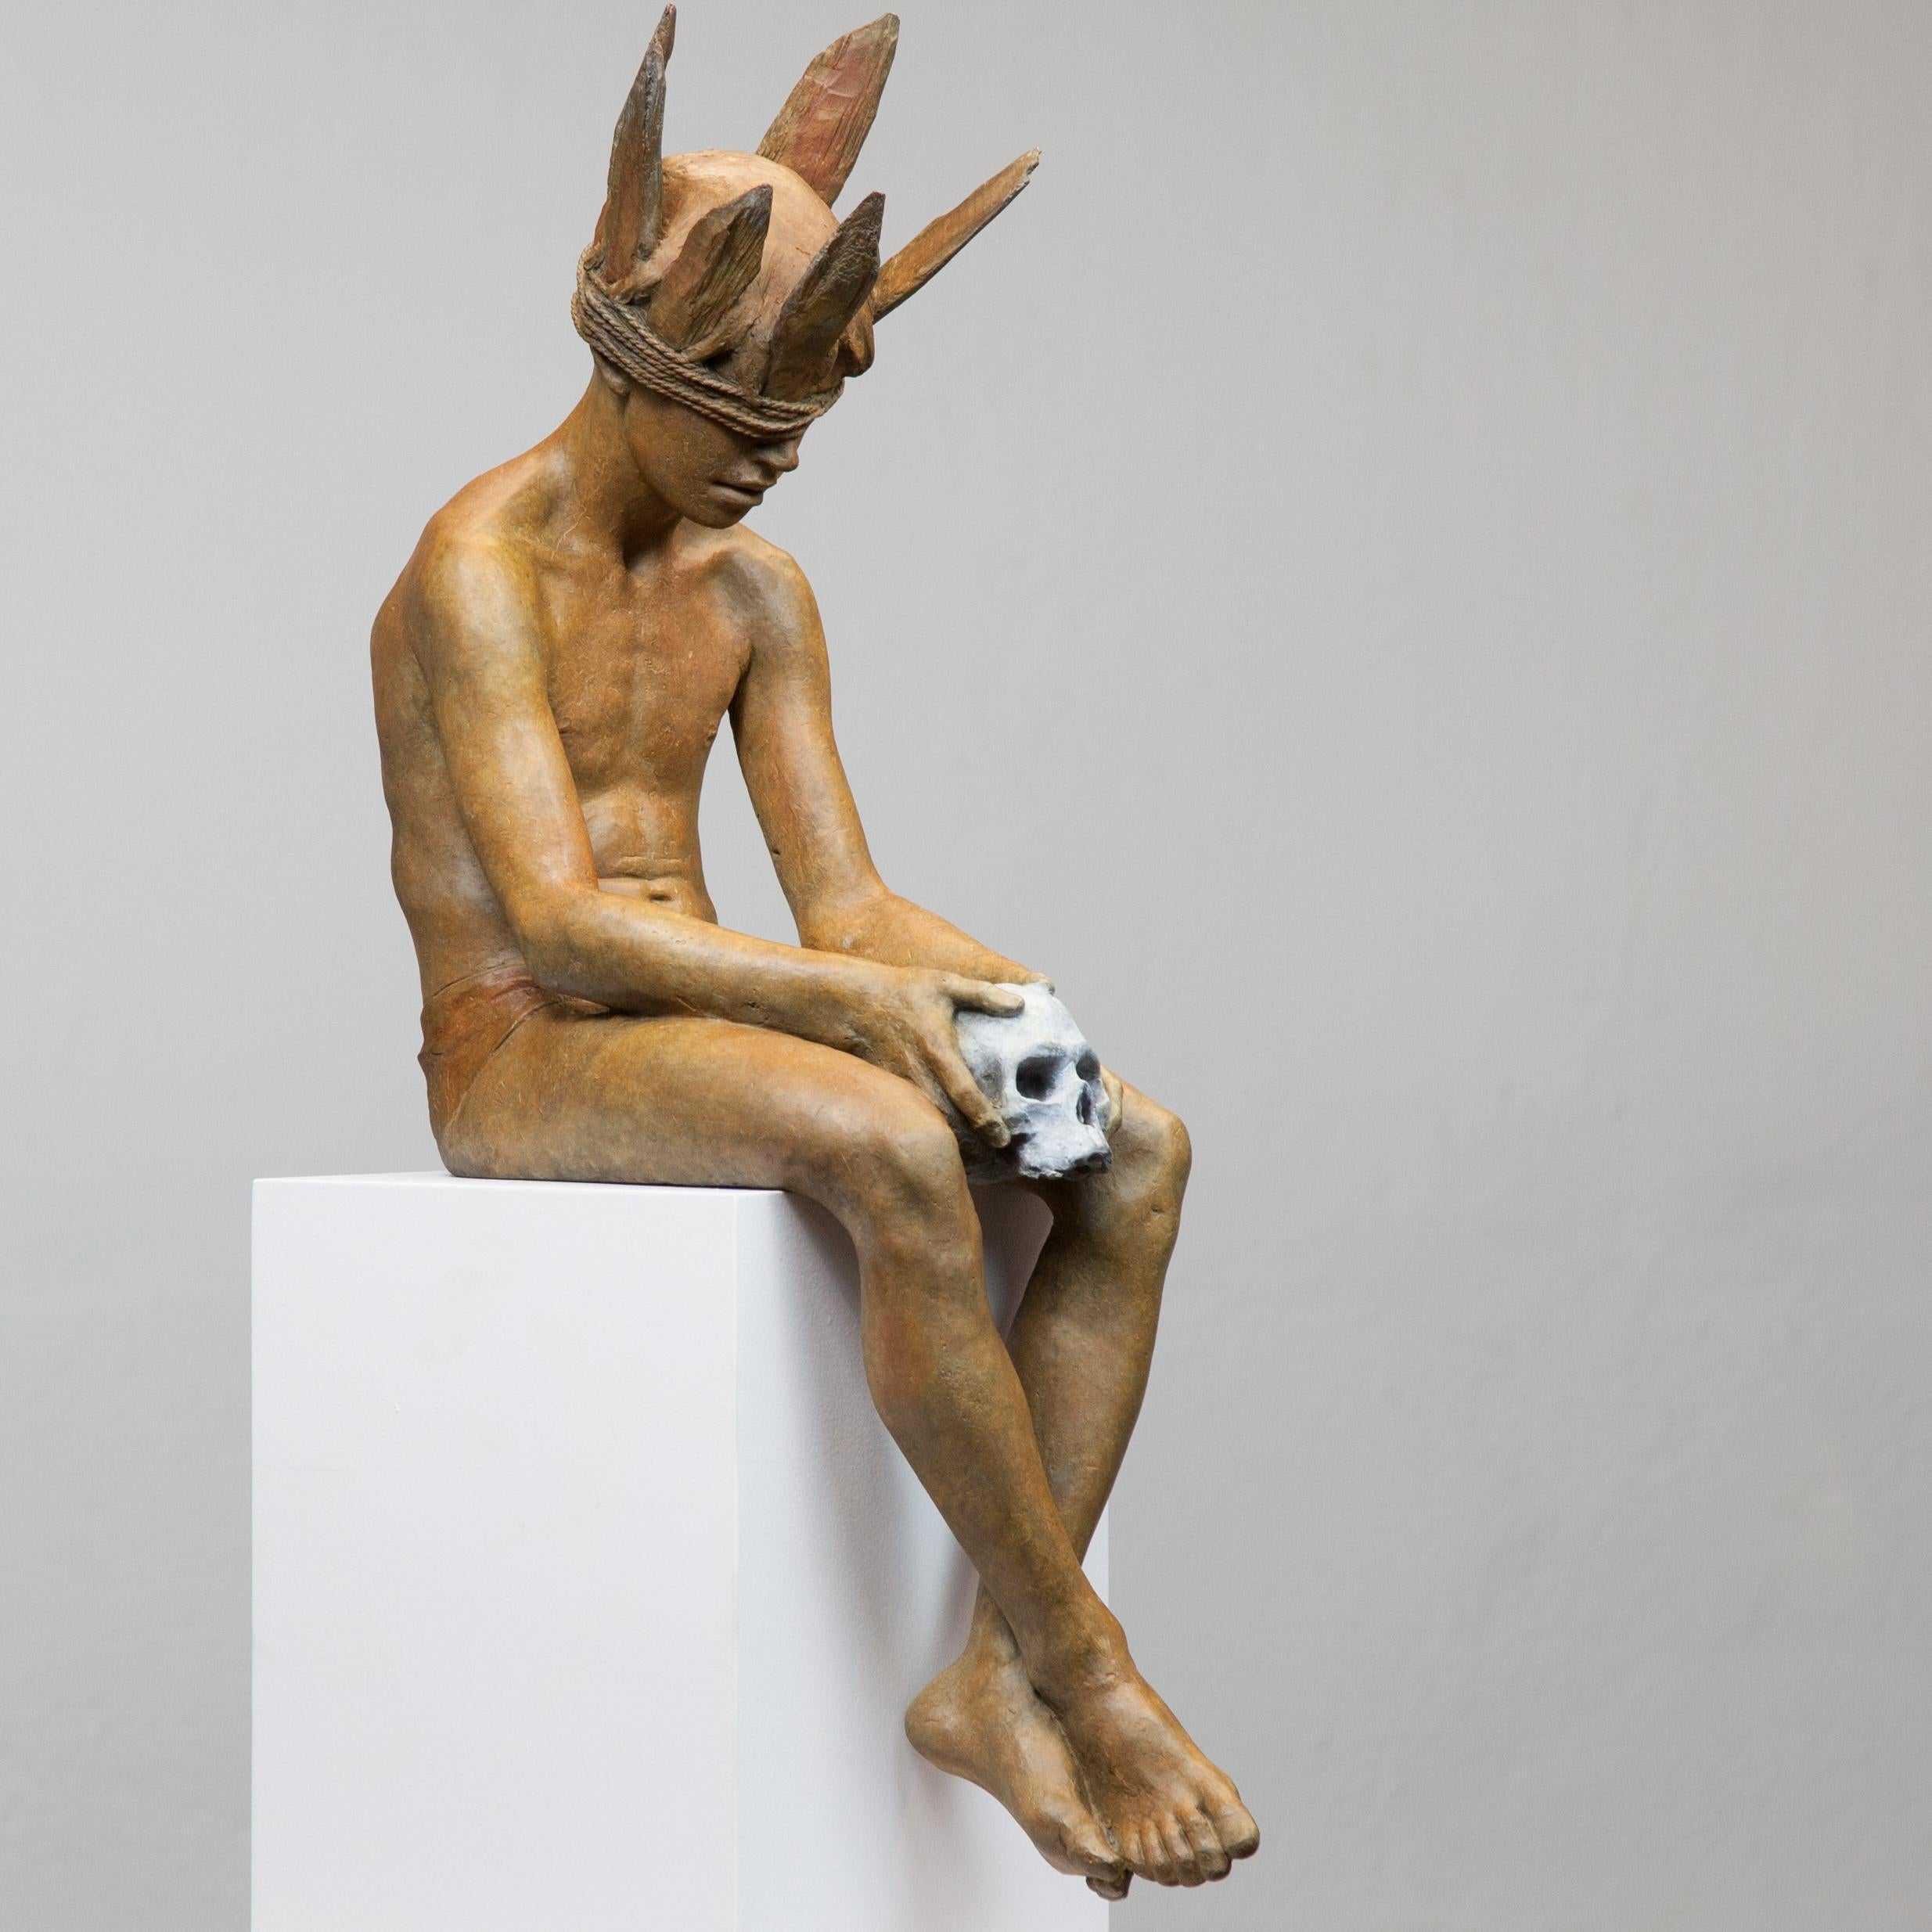 Hamlet, "The doubt", 2018
Bronze
24 × 6 7/10 × 13 in; 61 × 17 × 33 cm


Coderch and Malavia refers to a common project involving two Spanish sculptors, Joan Coderch and Javier Malavia. The first one is born in 1959 and studied at the Fine Arts